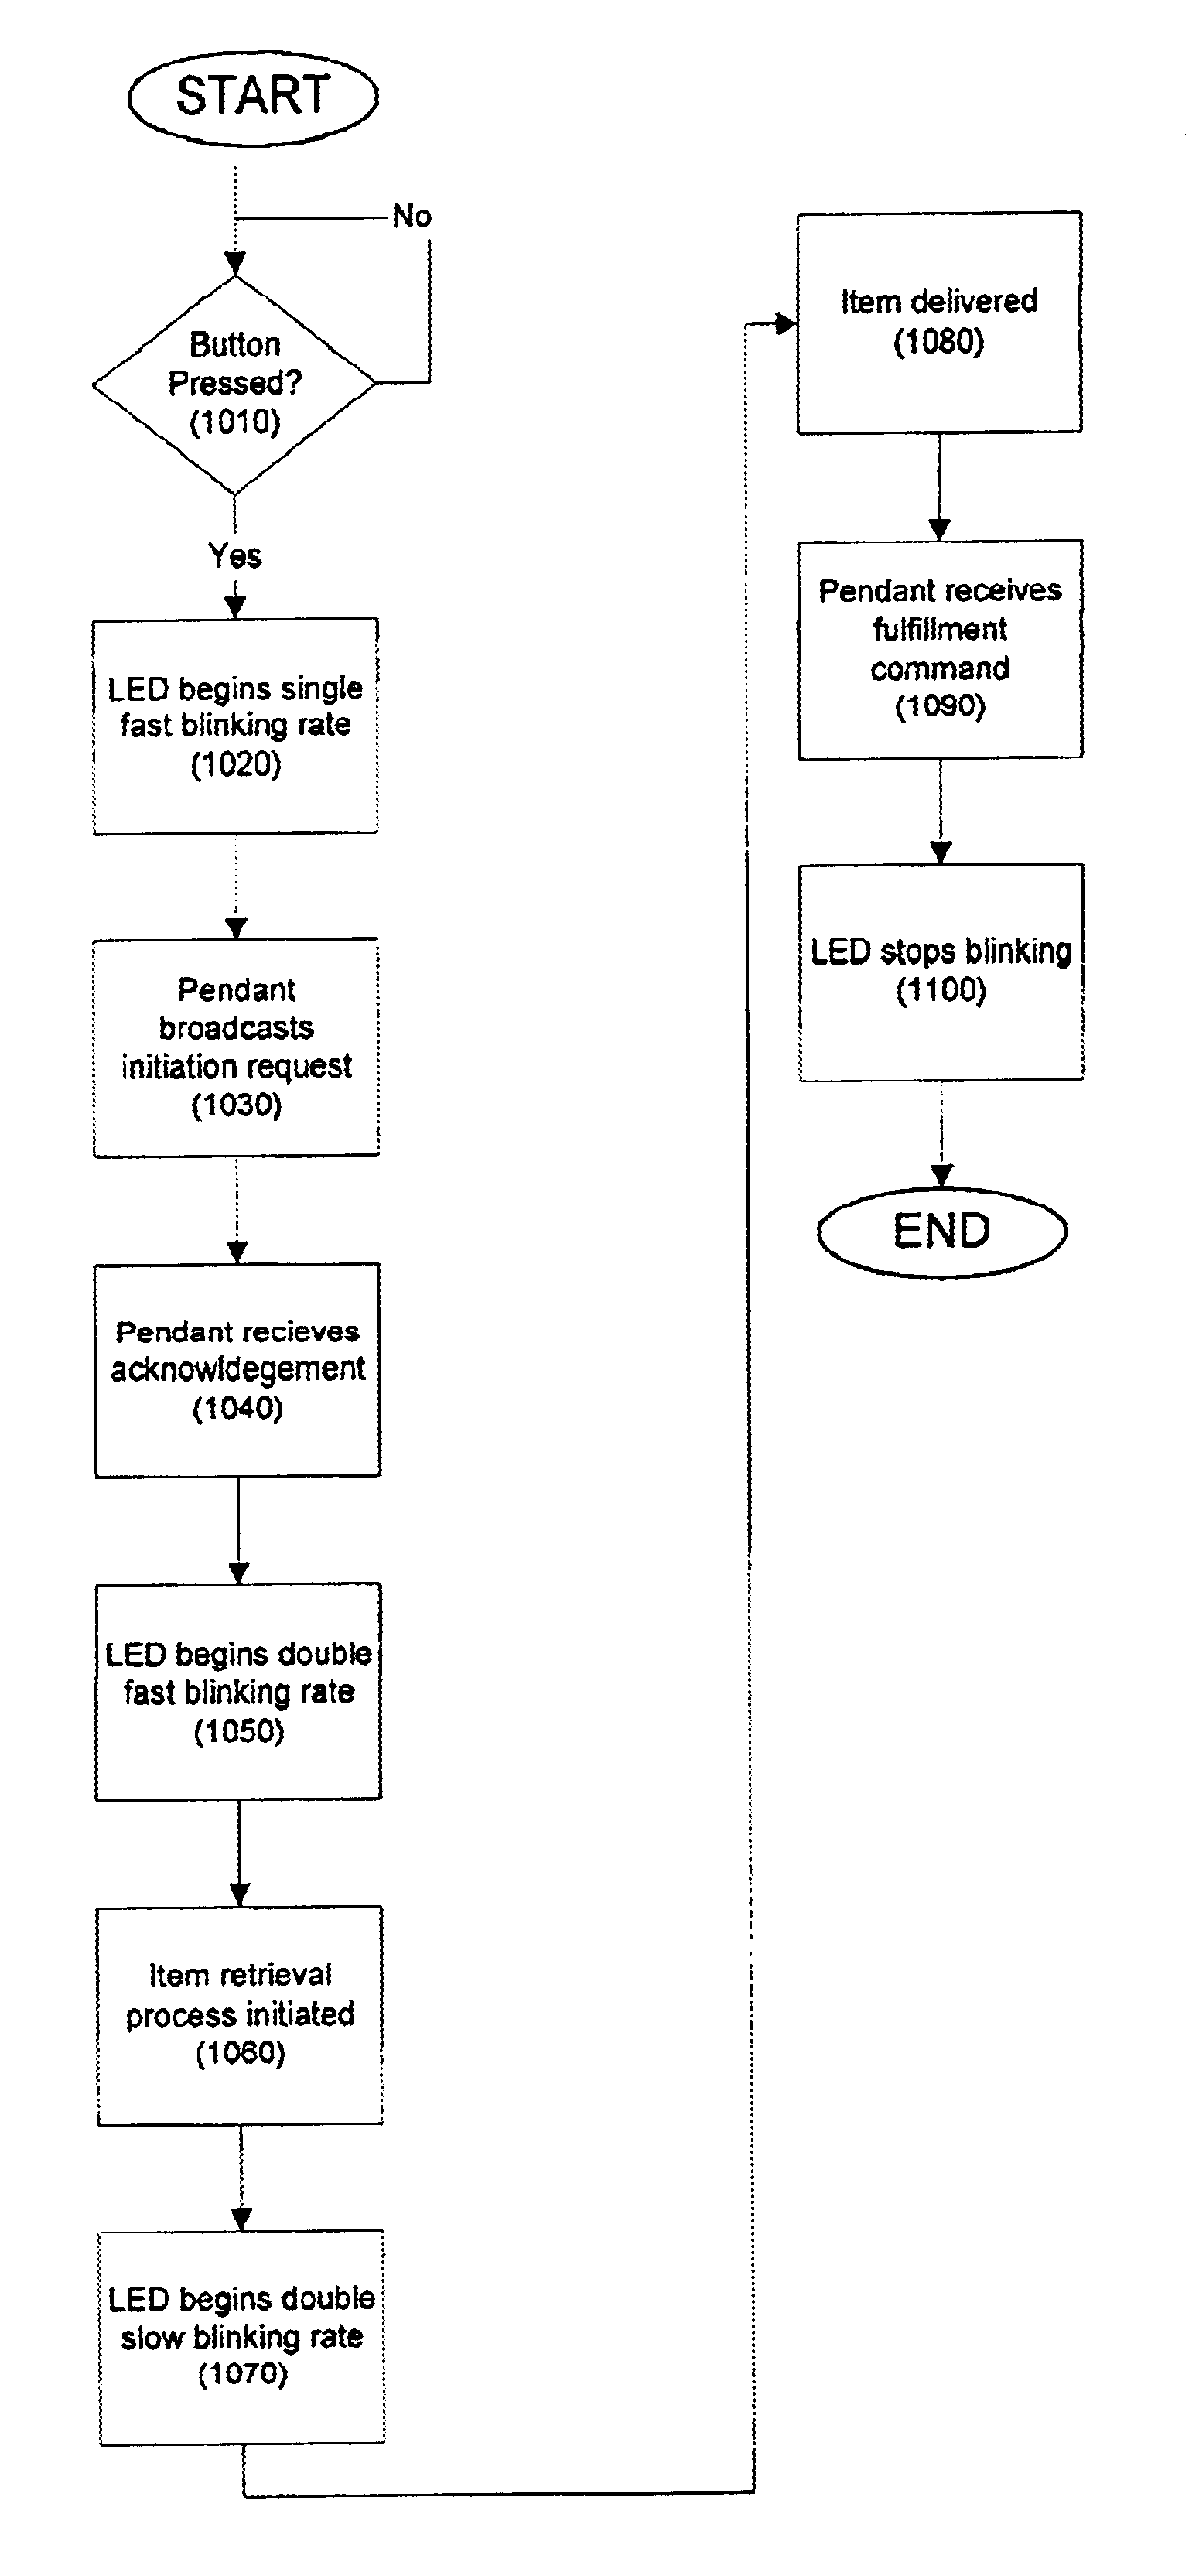 Apparatus for manufacturing management using a wireless device